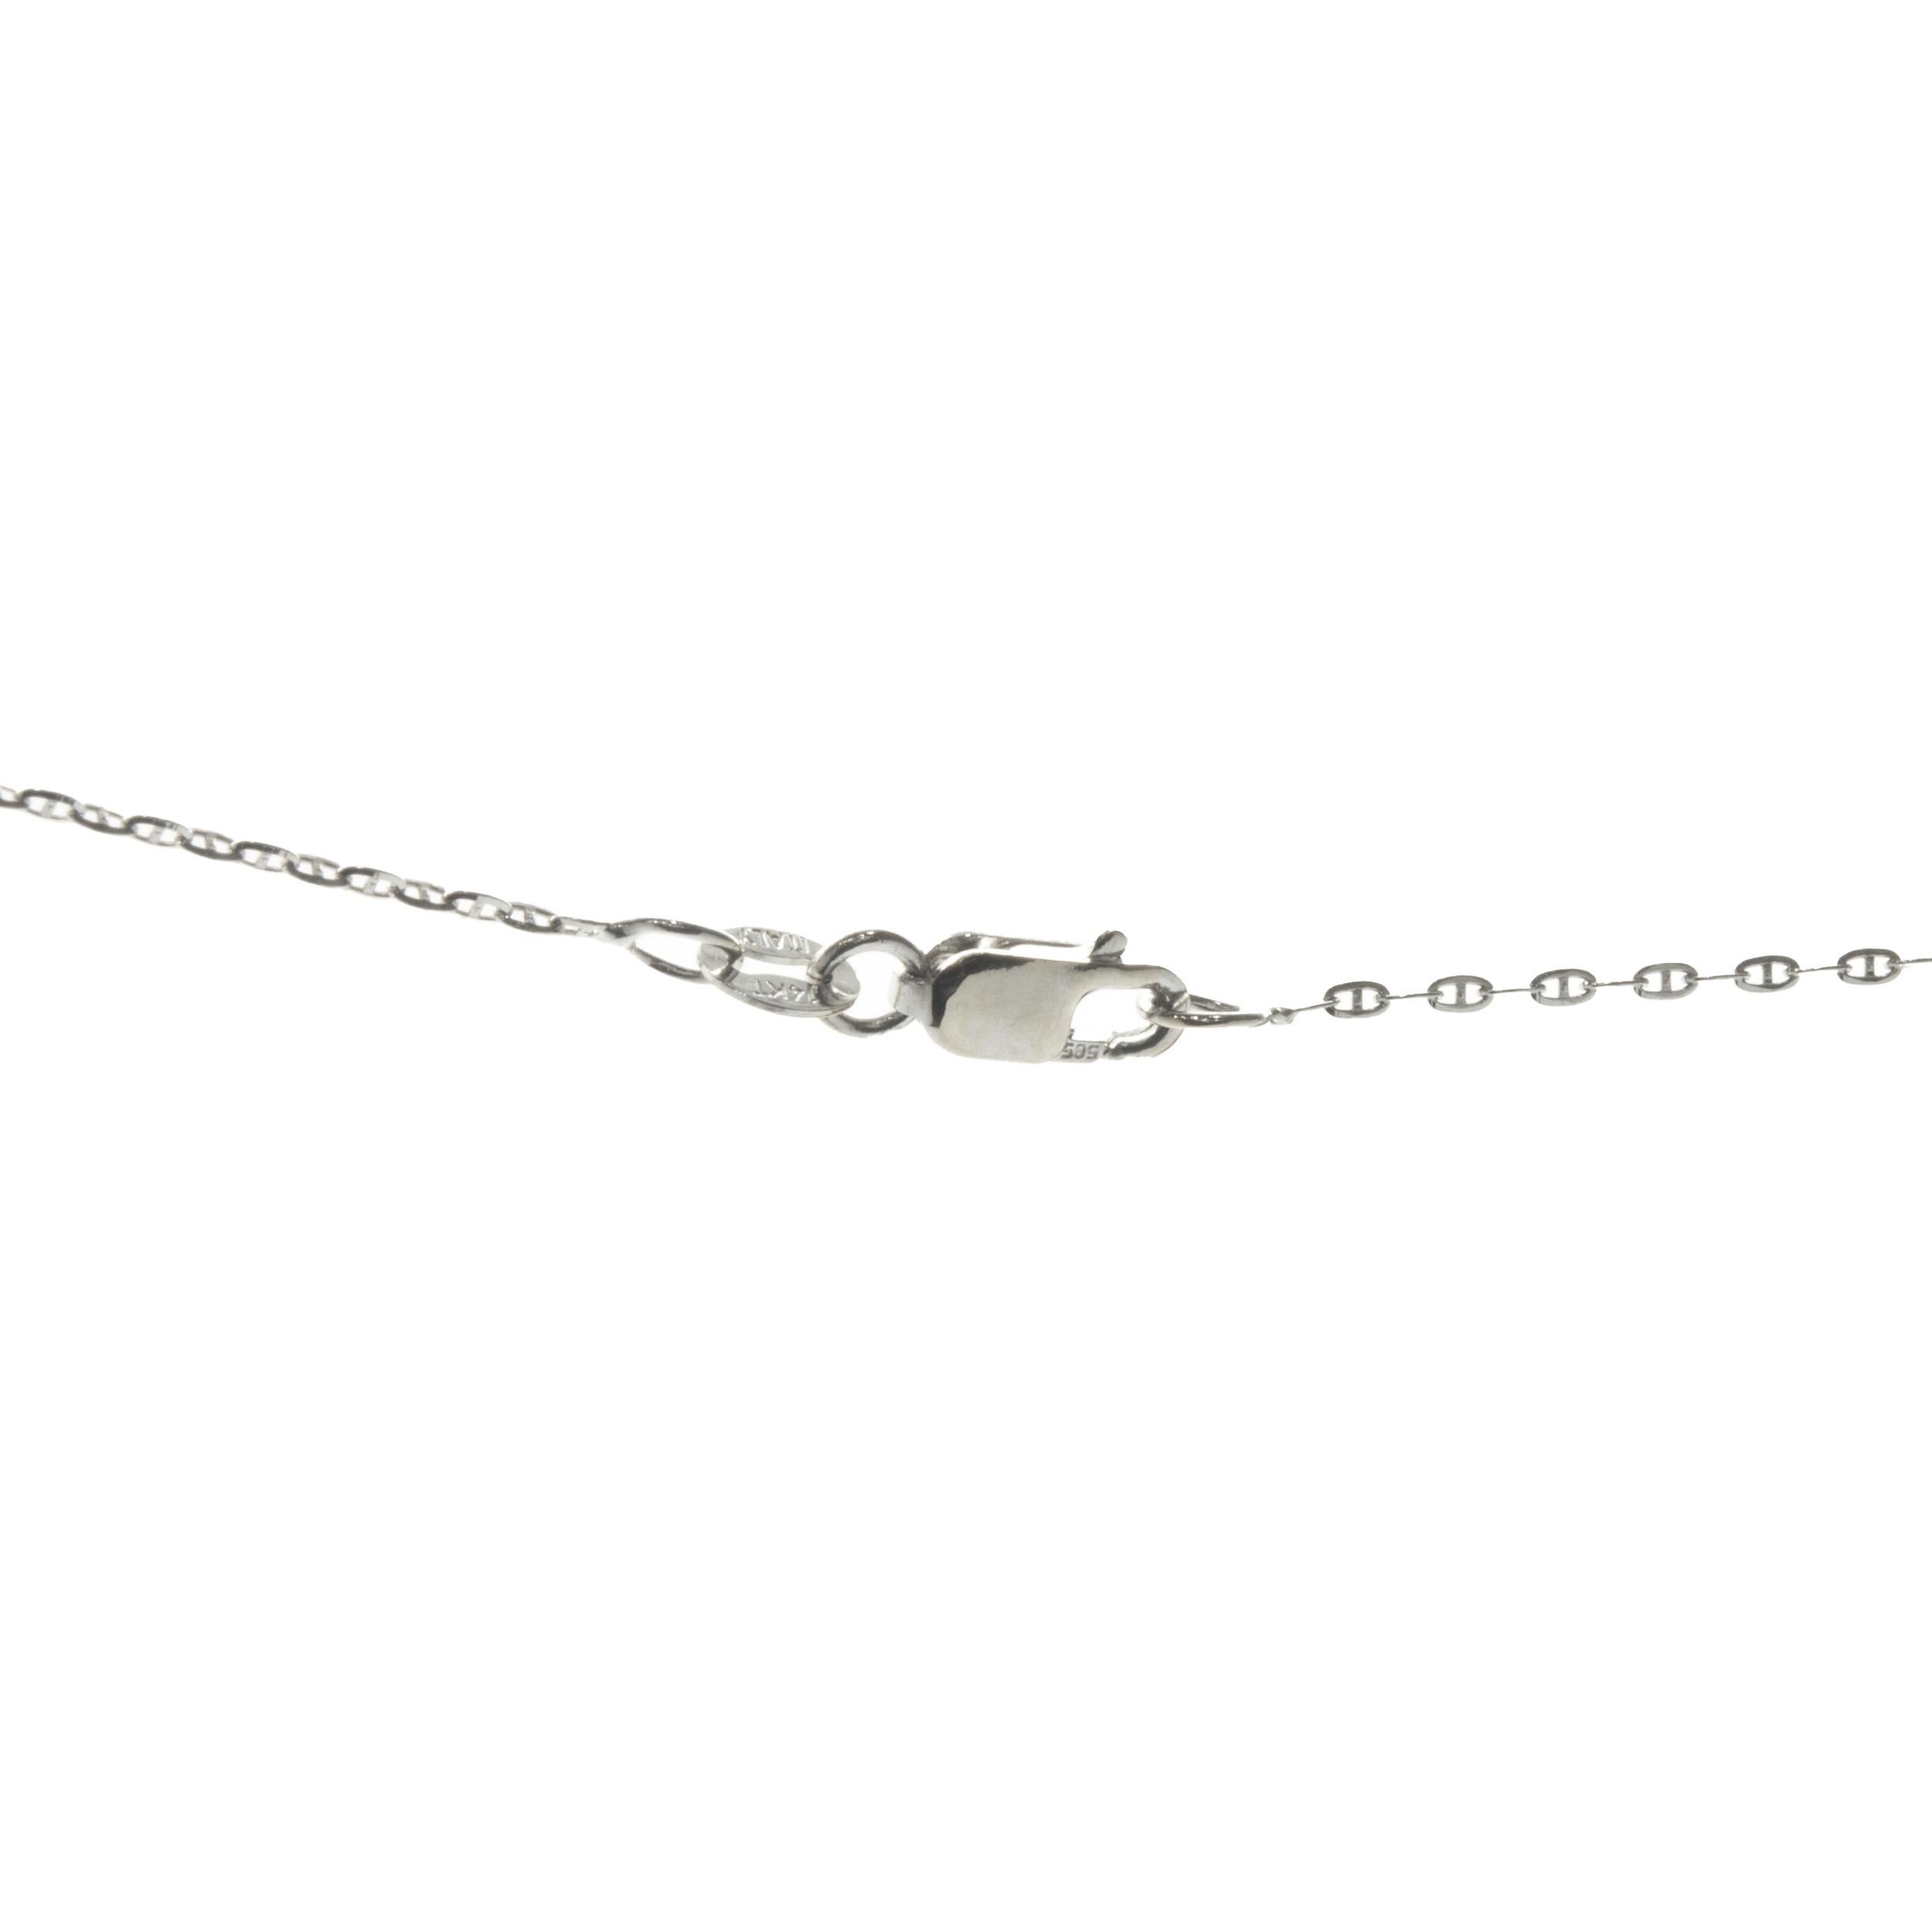 Designer: custom design
Material: 14K white gold
Diamond: round brilliant cut = 0.32cttw
Color: H
Clarity: SI1
Dimensions: necklace measures 18-inches in length 
Weight: 3.22 grams
